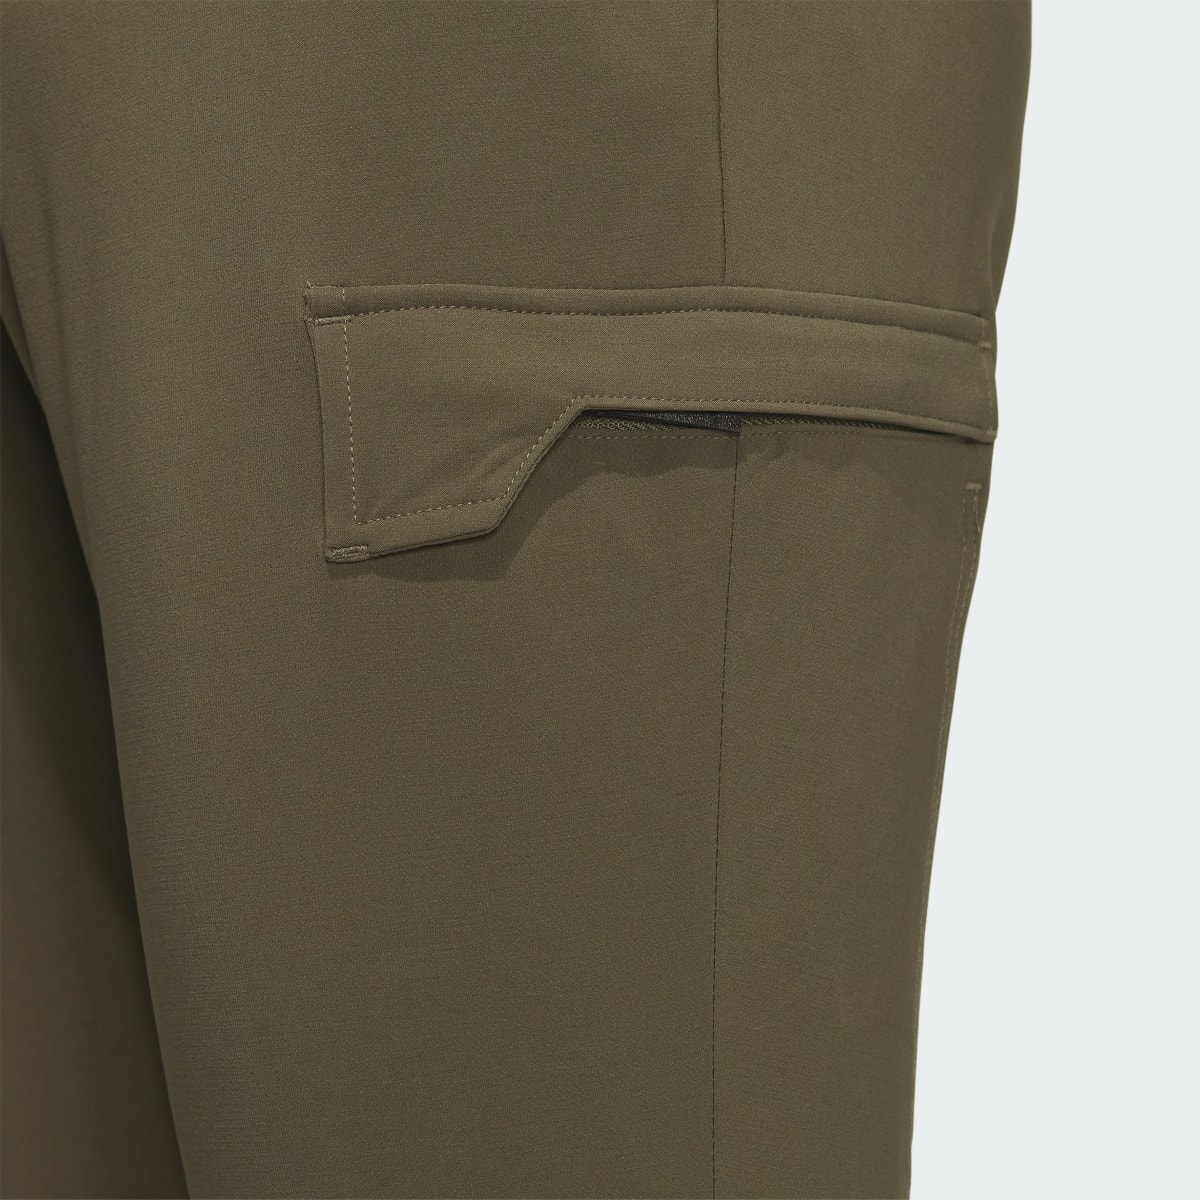 Adidas Go-To Cargo Pocket Long Trousers. 6